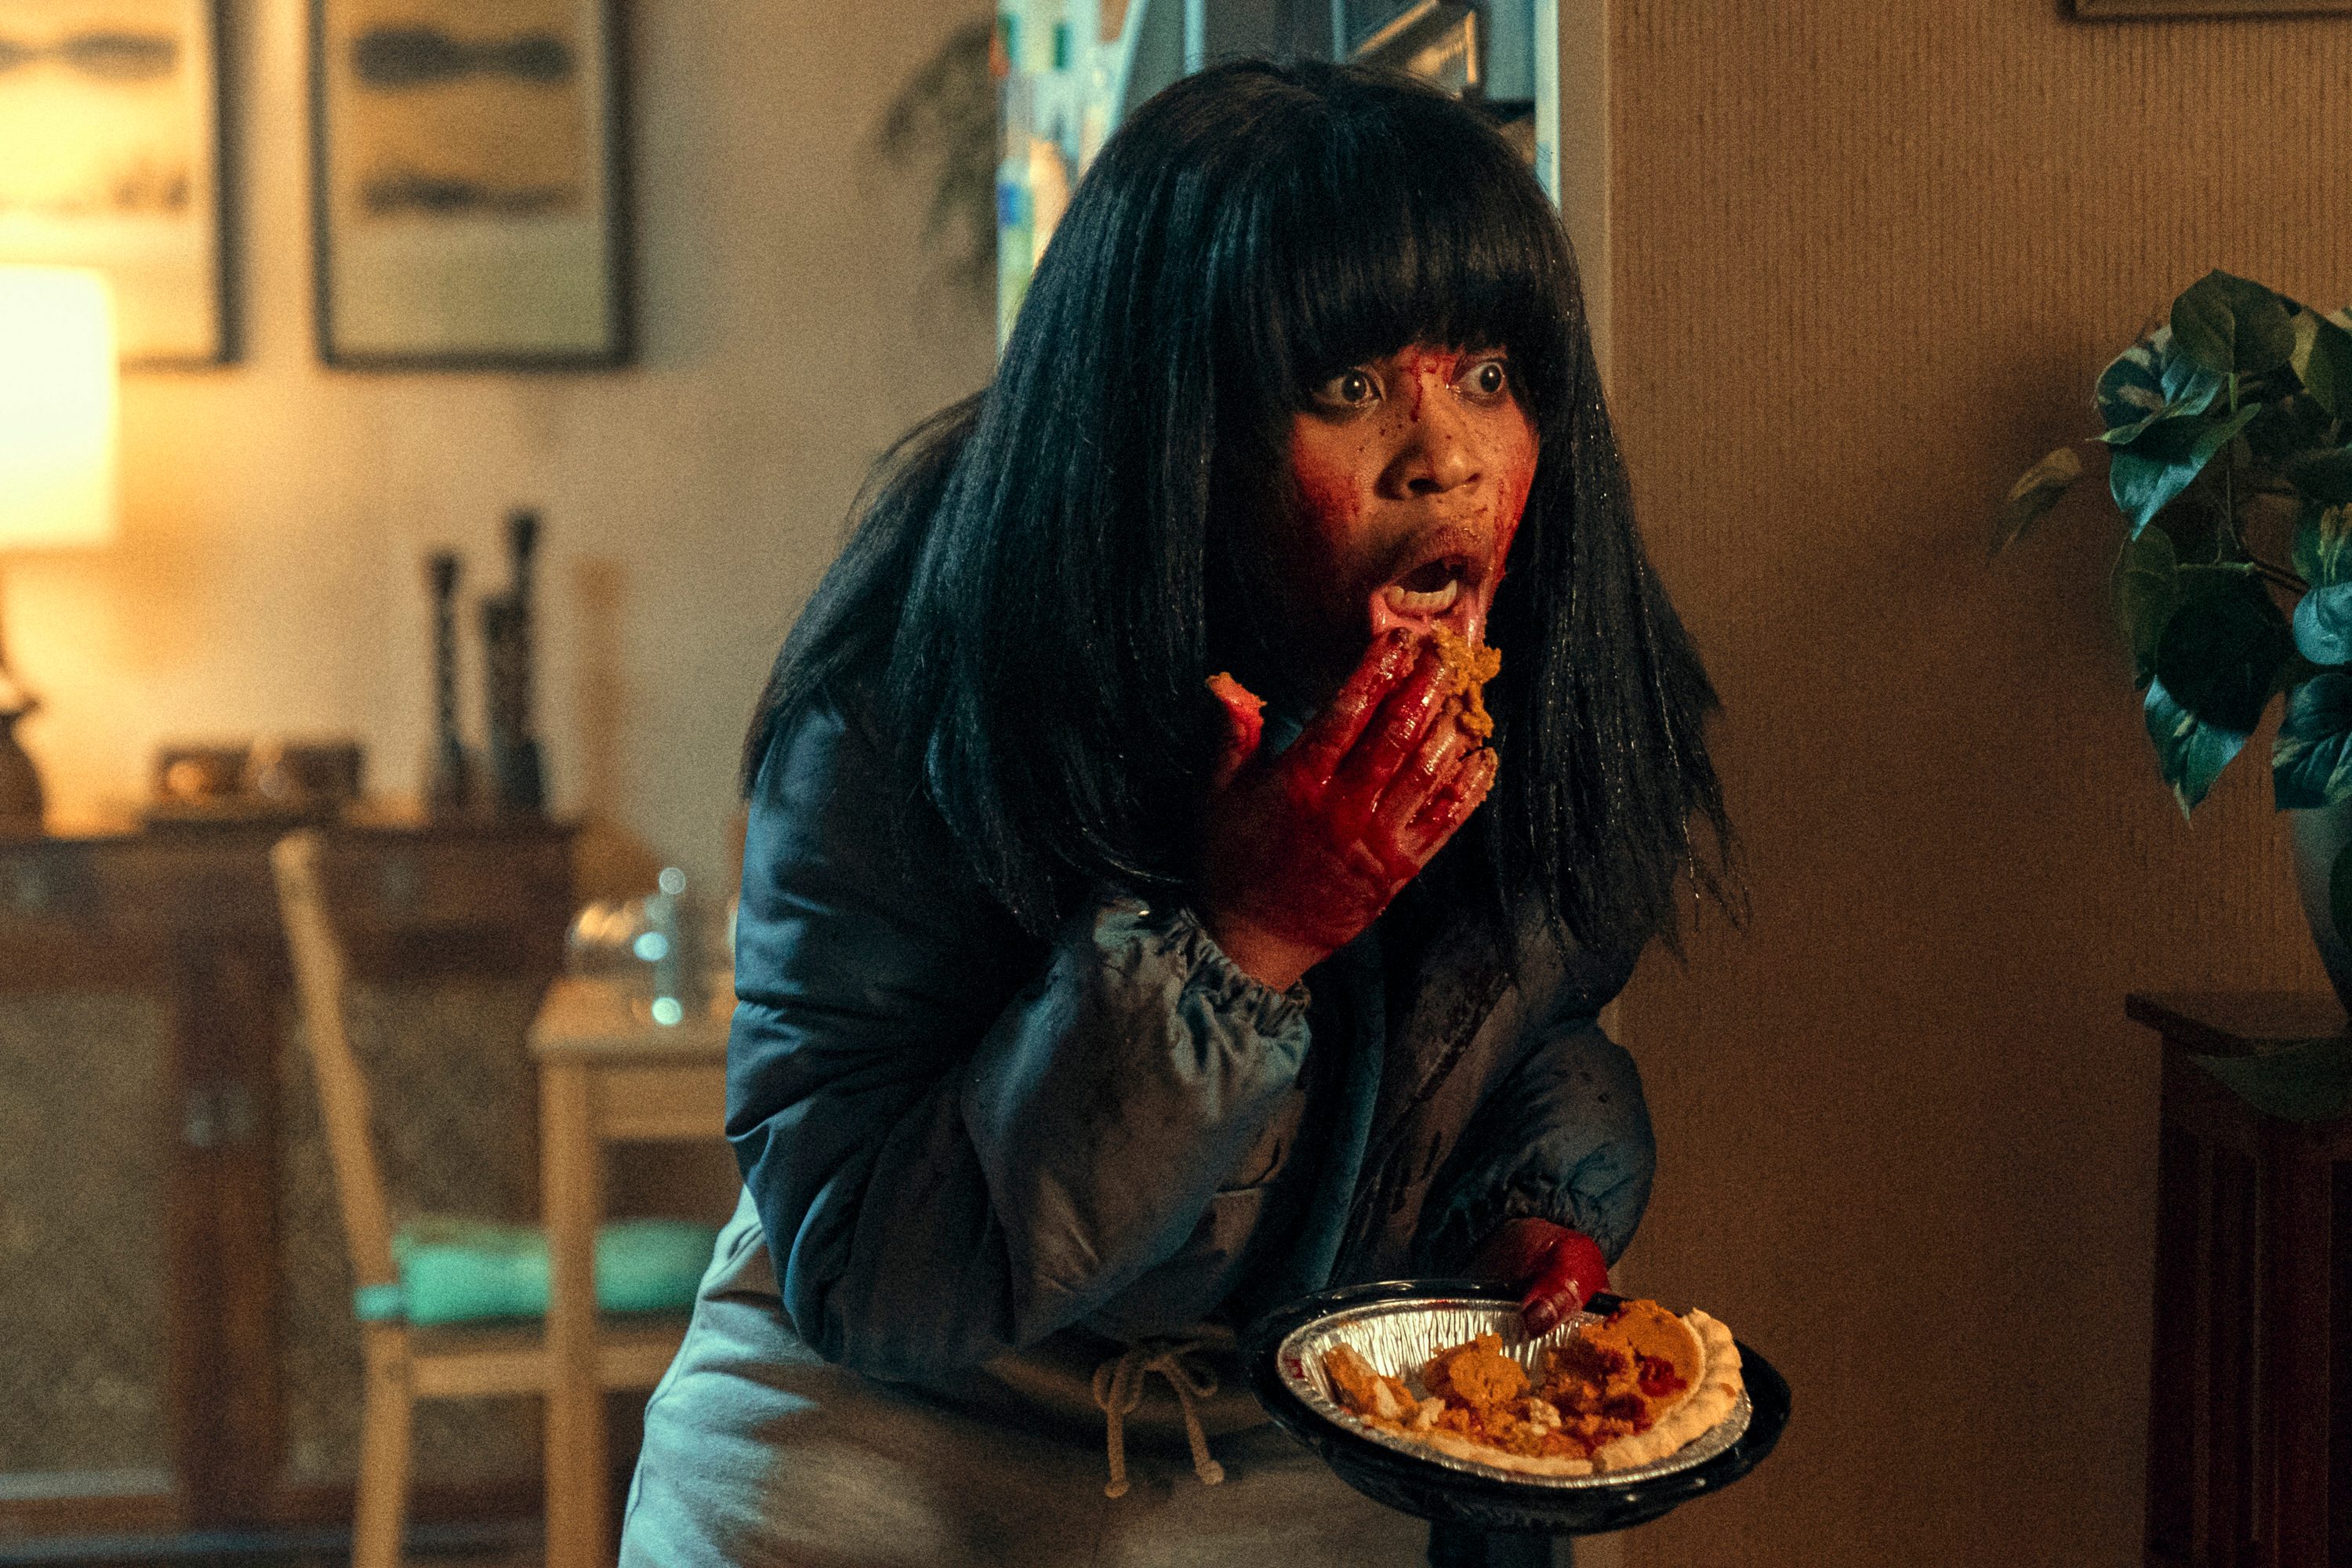 Image of Dominique Fishback as Dre in Amazon's 'Swarm.' She is a Black woman, and is standing in a house with her face and hands covered in blood as she holds a half-eaten pumpkin pie and scoops some into her mouth with her hand. She has long, black hair and bangs, and wears a puffy, black jacket and grey sweatpants.